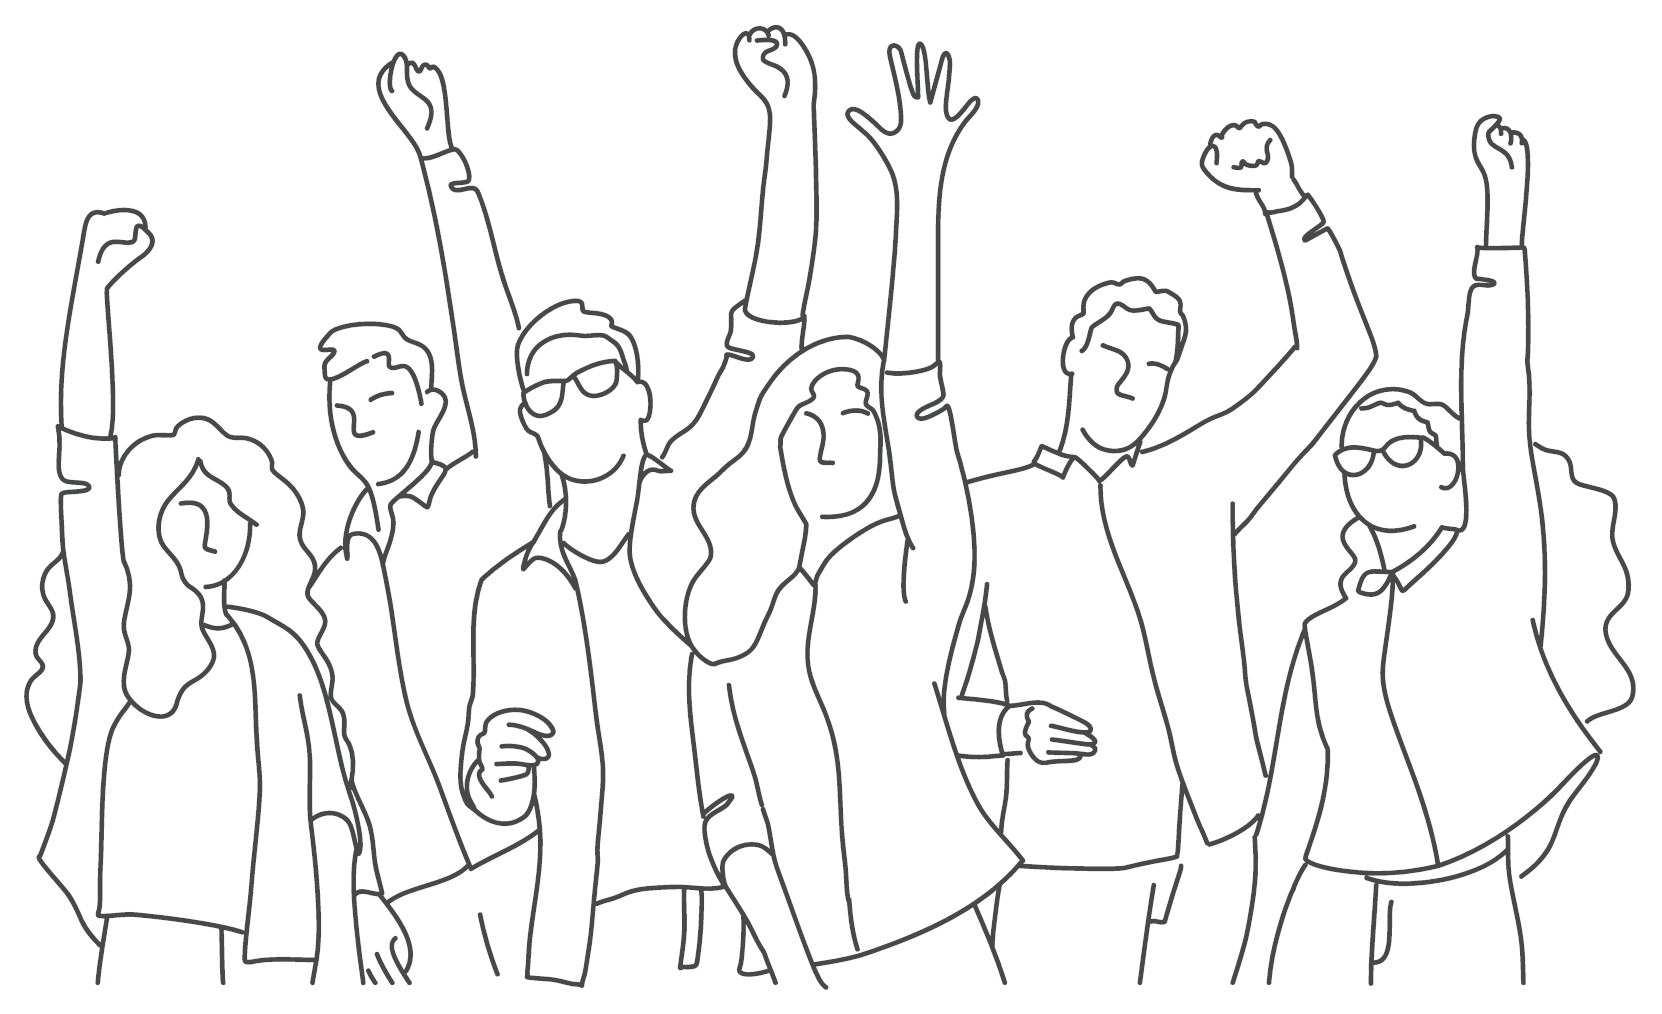 Line drawing for a group of people celebrating with their hands in the air.